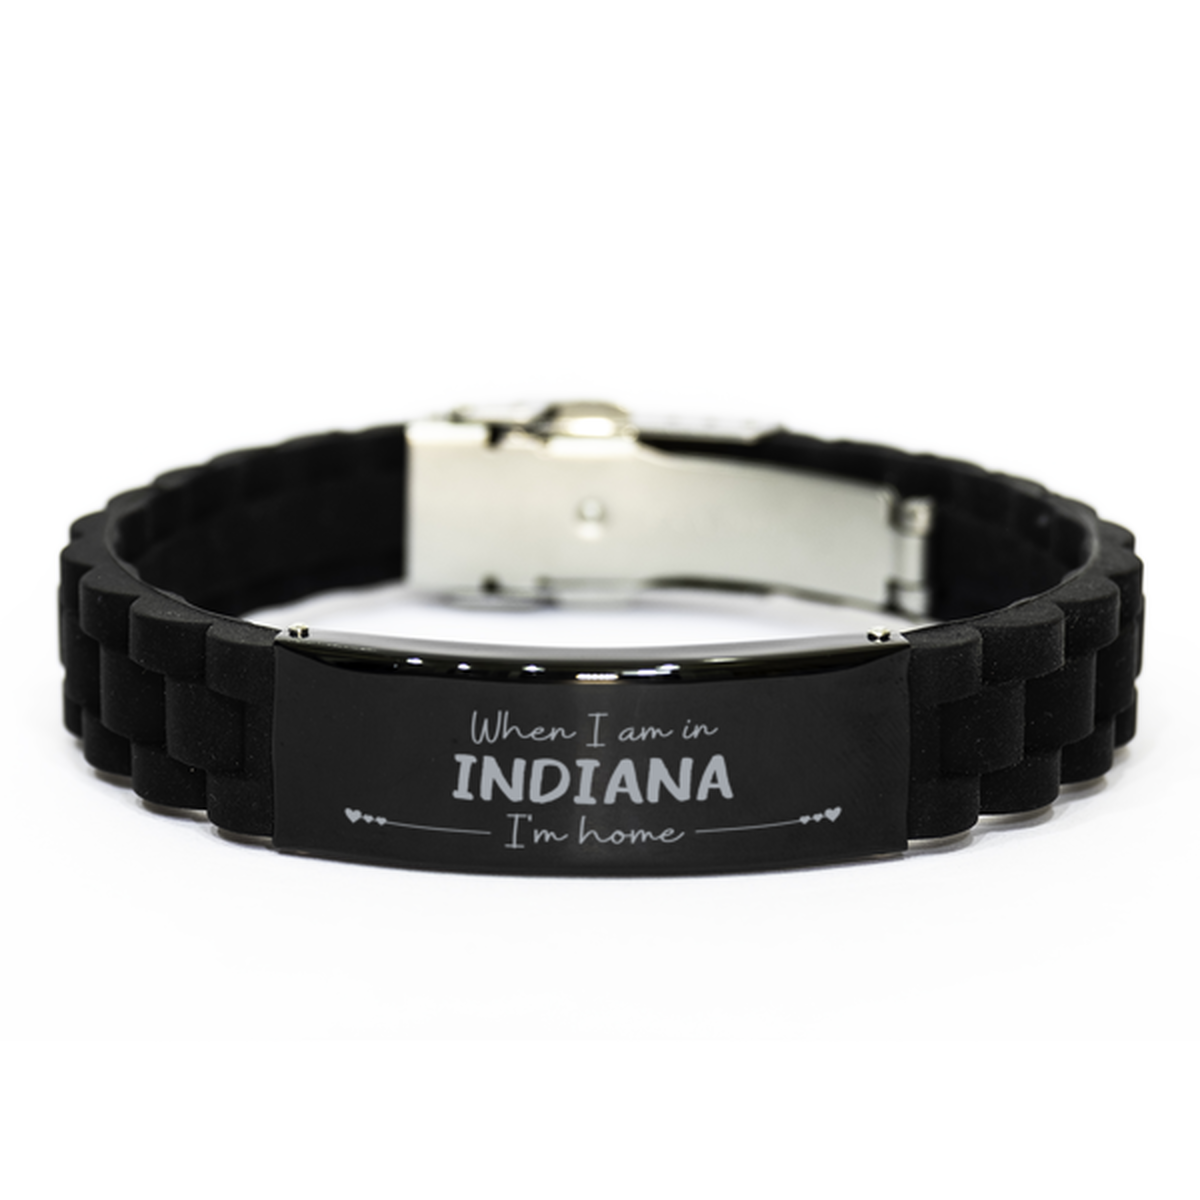 When I am in Indiana I'm home Black Glidelock Clasp Bracelet, Cheap Gifts For Indiana, State Indiana Birthday Gifts for Friends Coworker